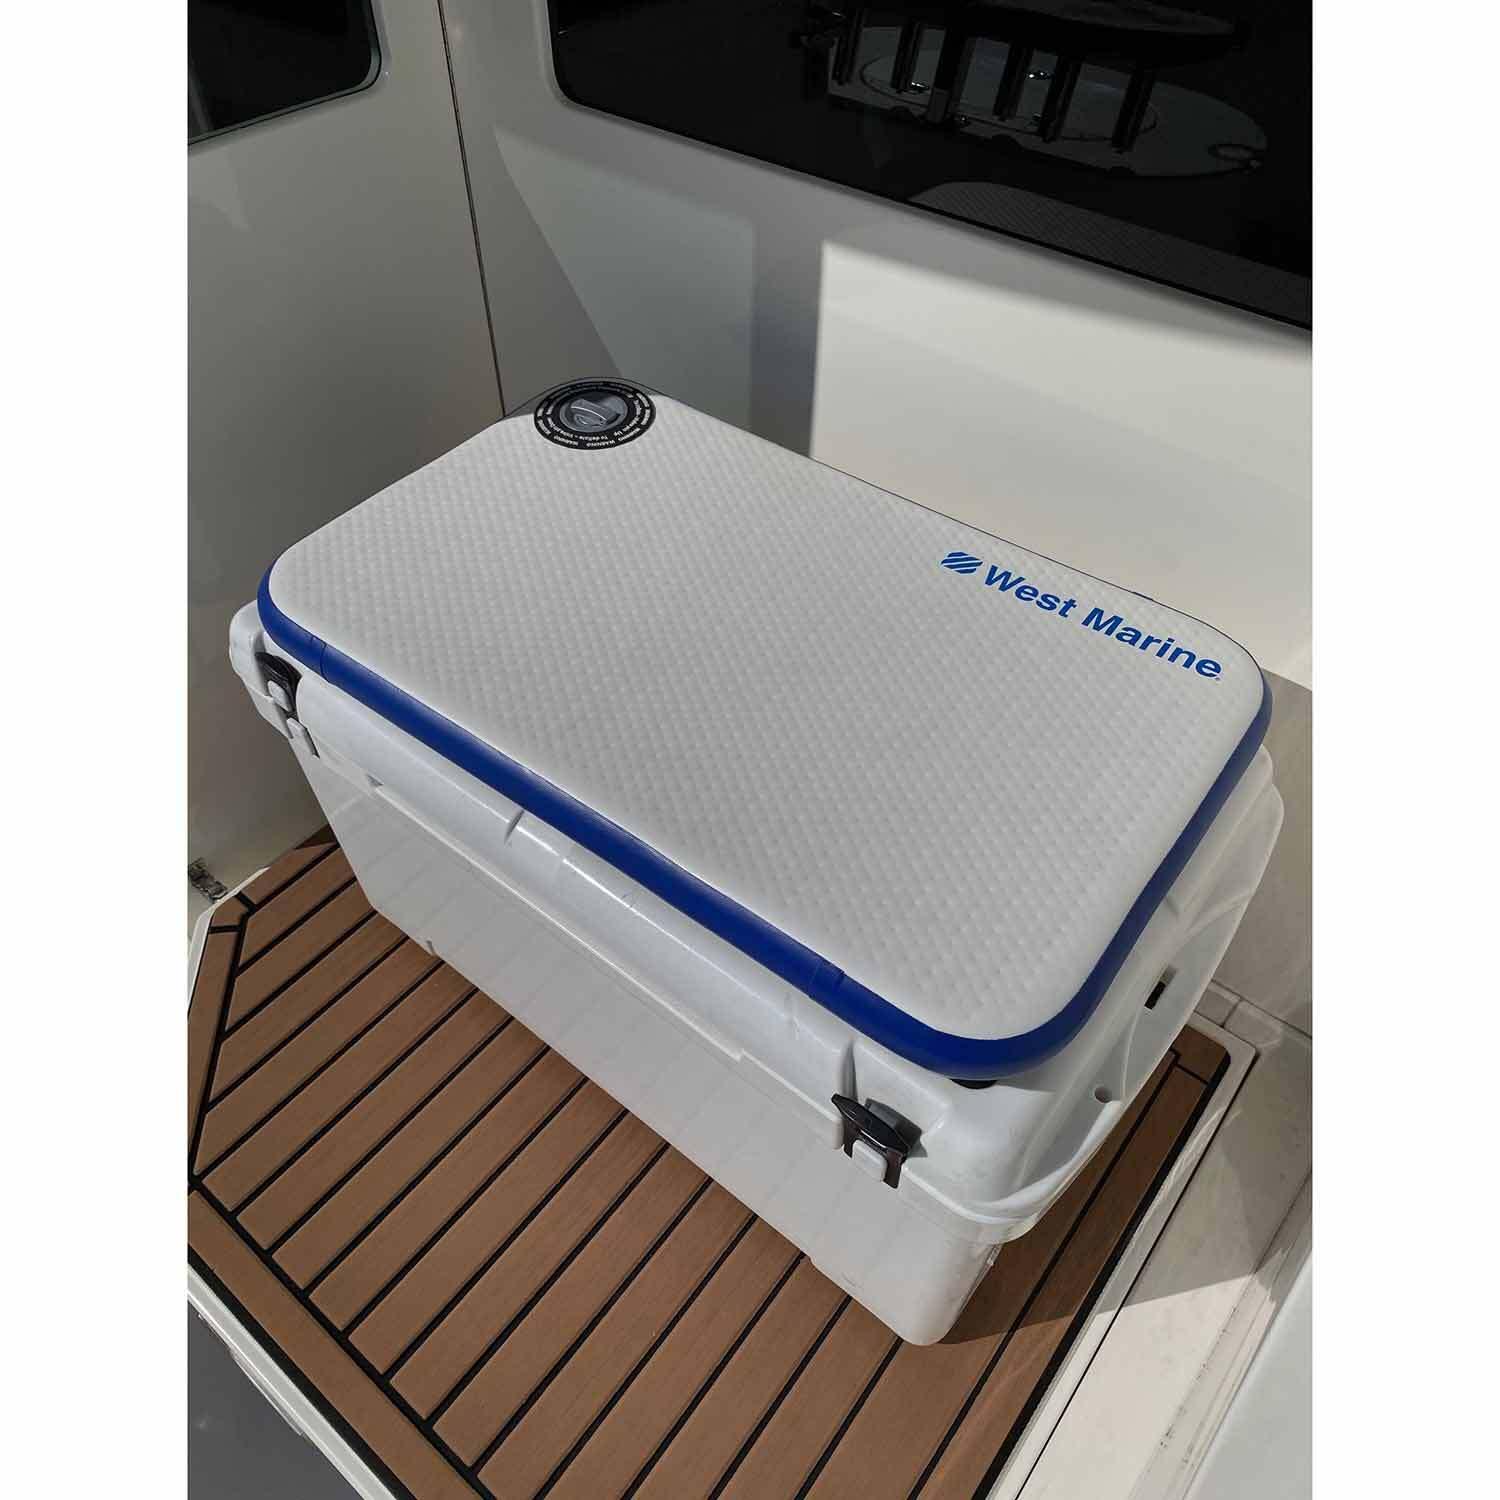 Cooler Seat Cushion, Boat Cushion Made With Seaquest Marine Pleated Vinyl.